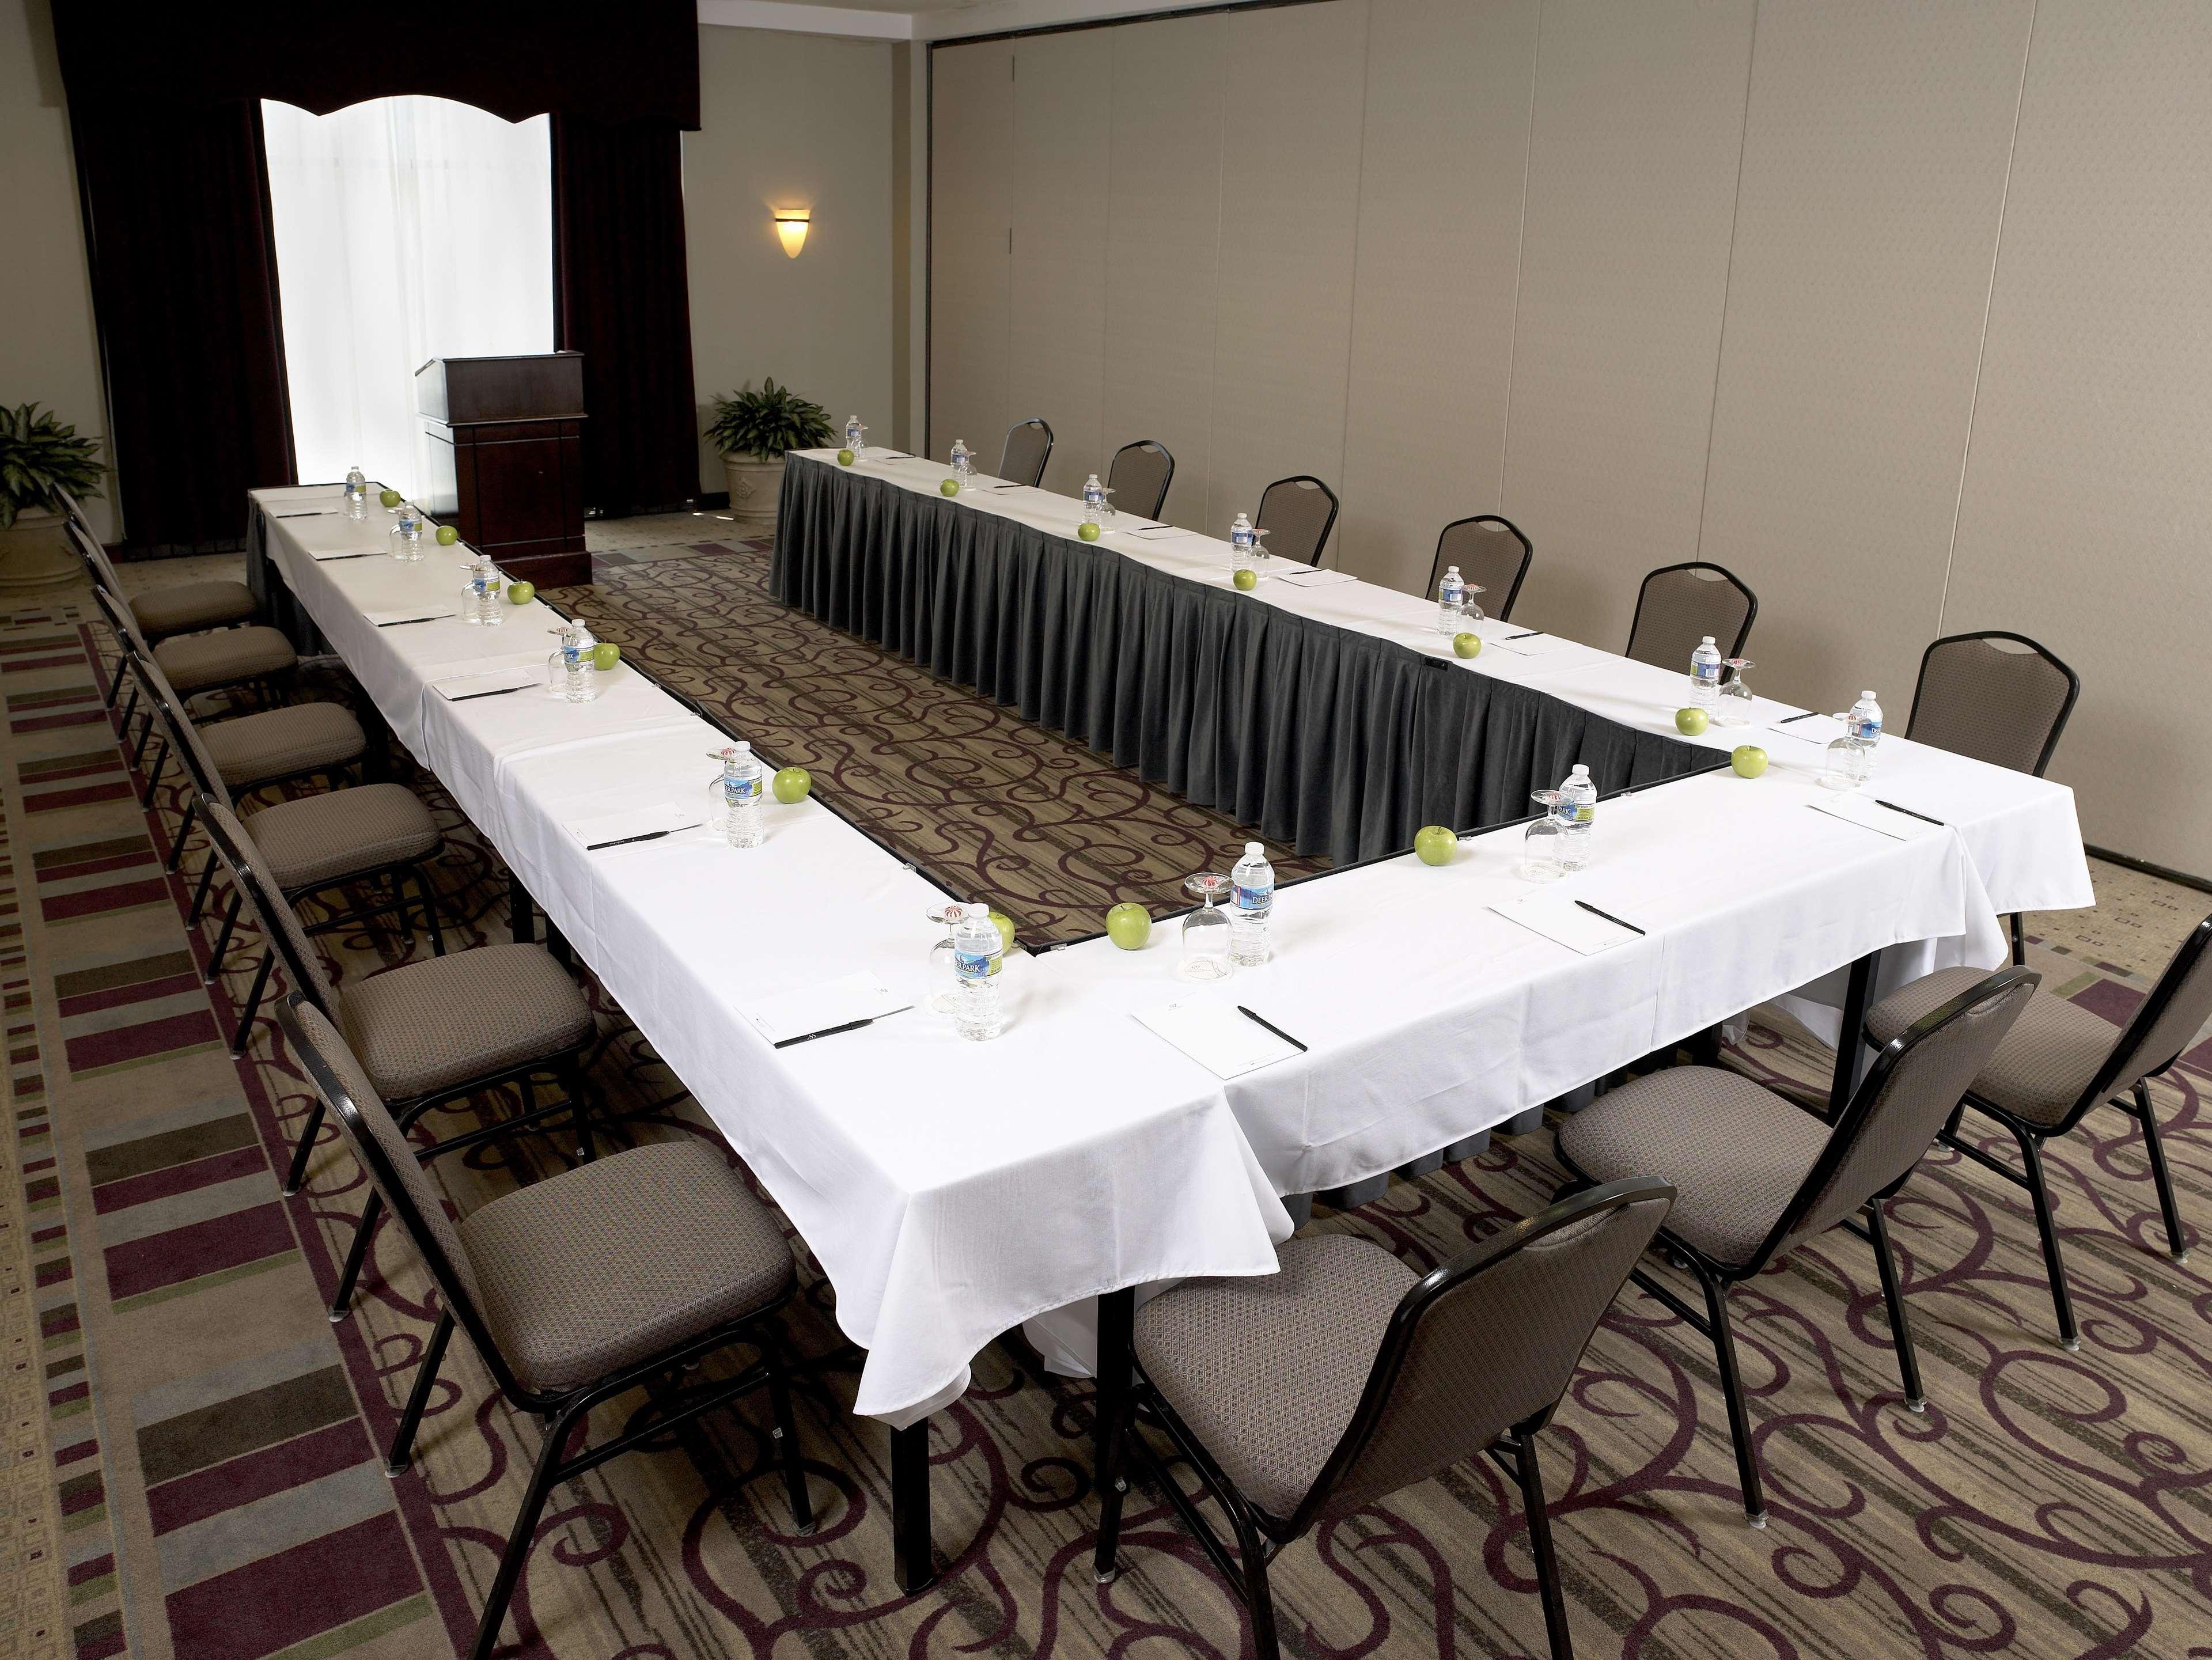 Doubletree By Hilton Charlotte Airport Hotel Facilities photo